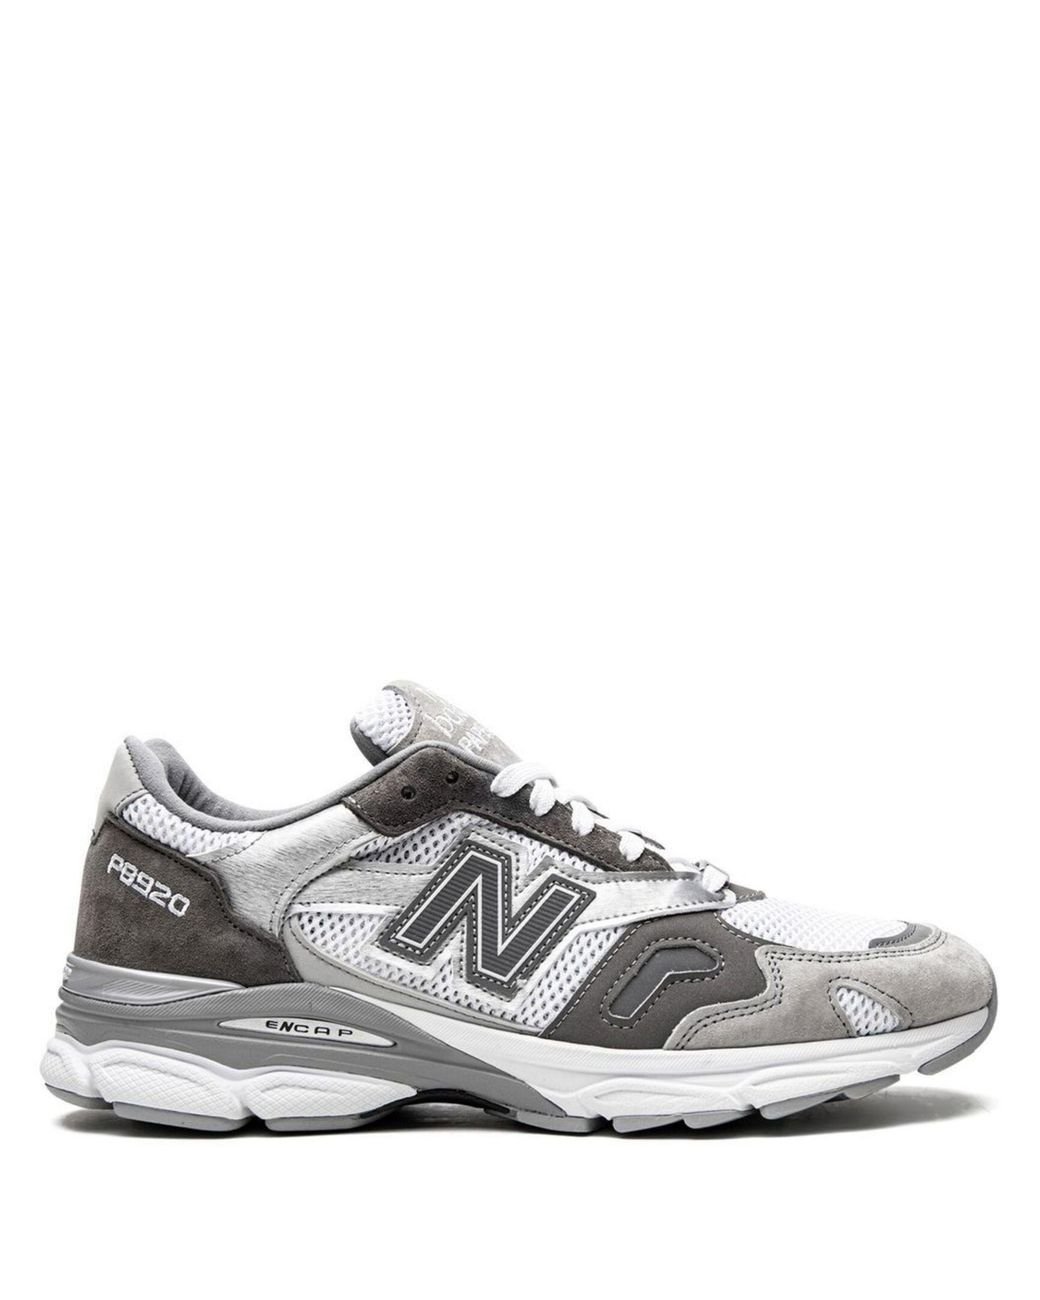 New Balance X Paperboy X Beams 920 Sneakers - Men's - Rubber ...